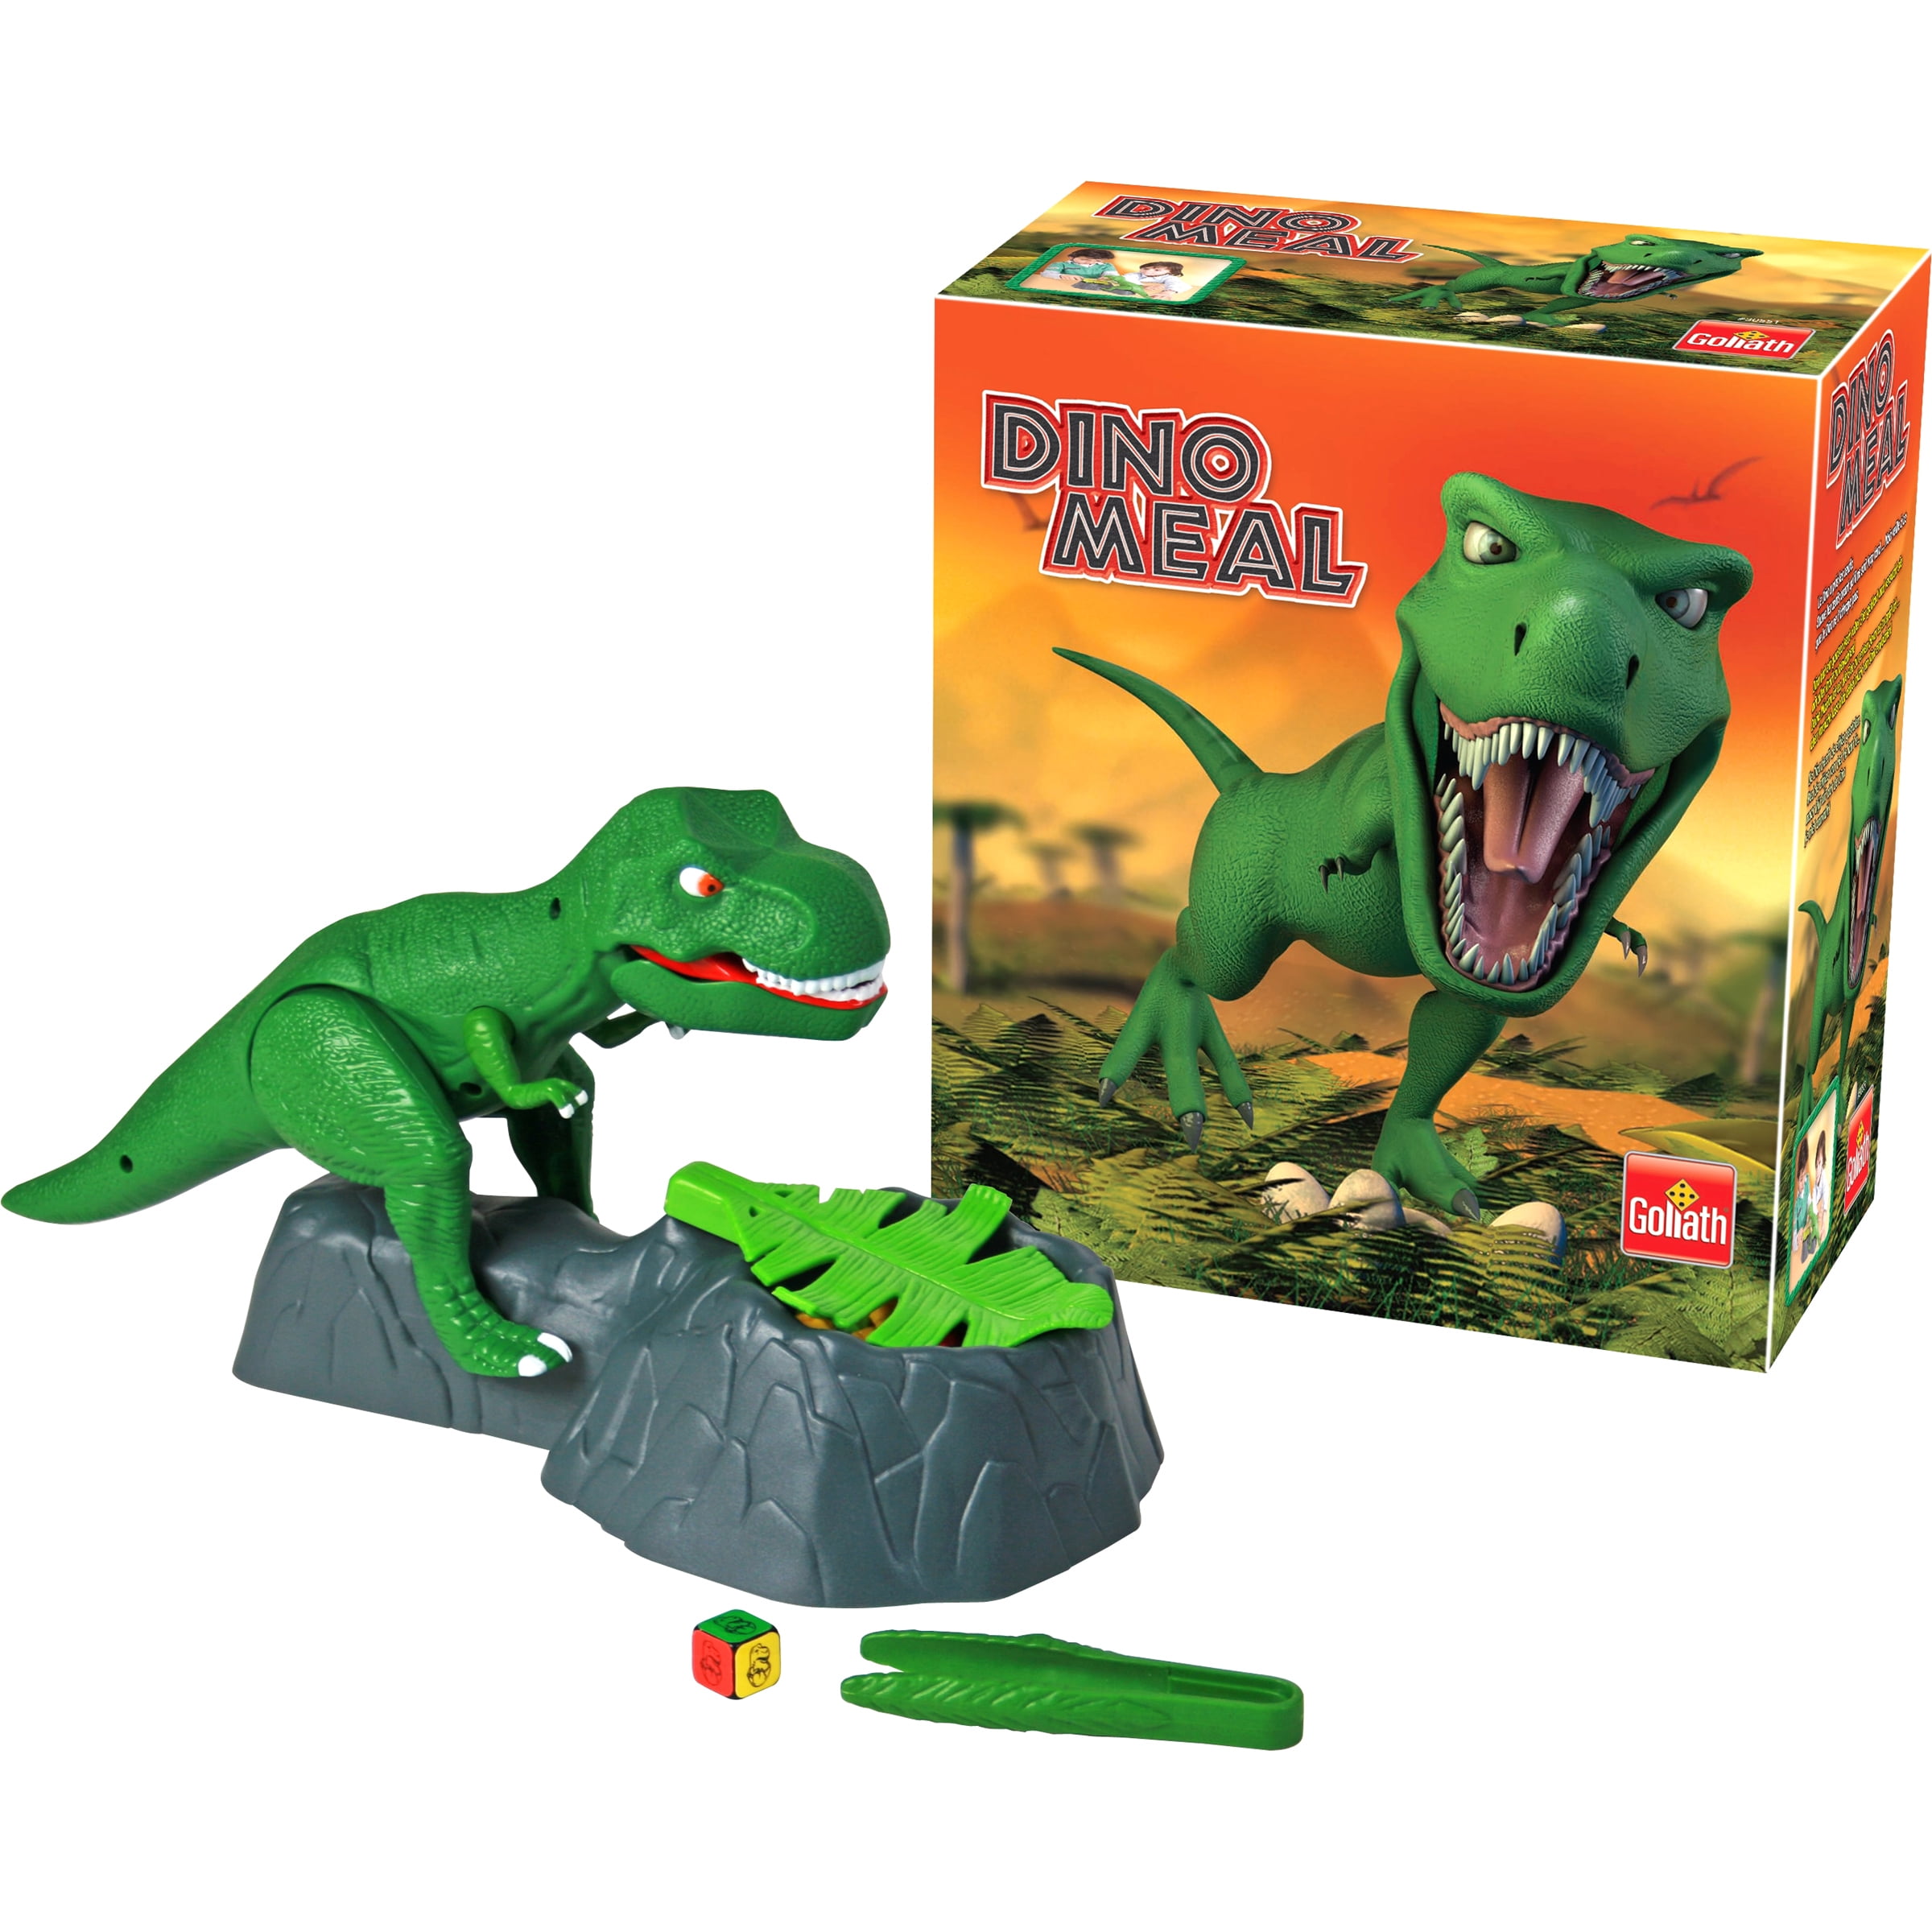 Dino Crunch Game With Bonus Card Game, Card Games